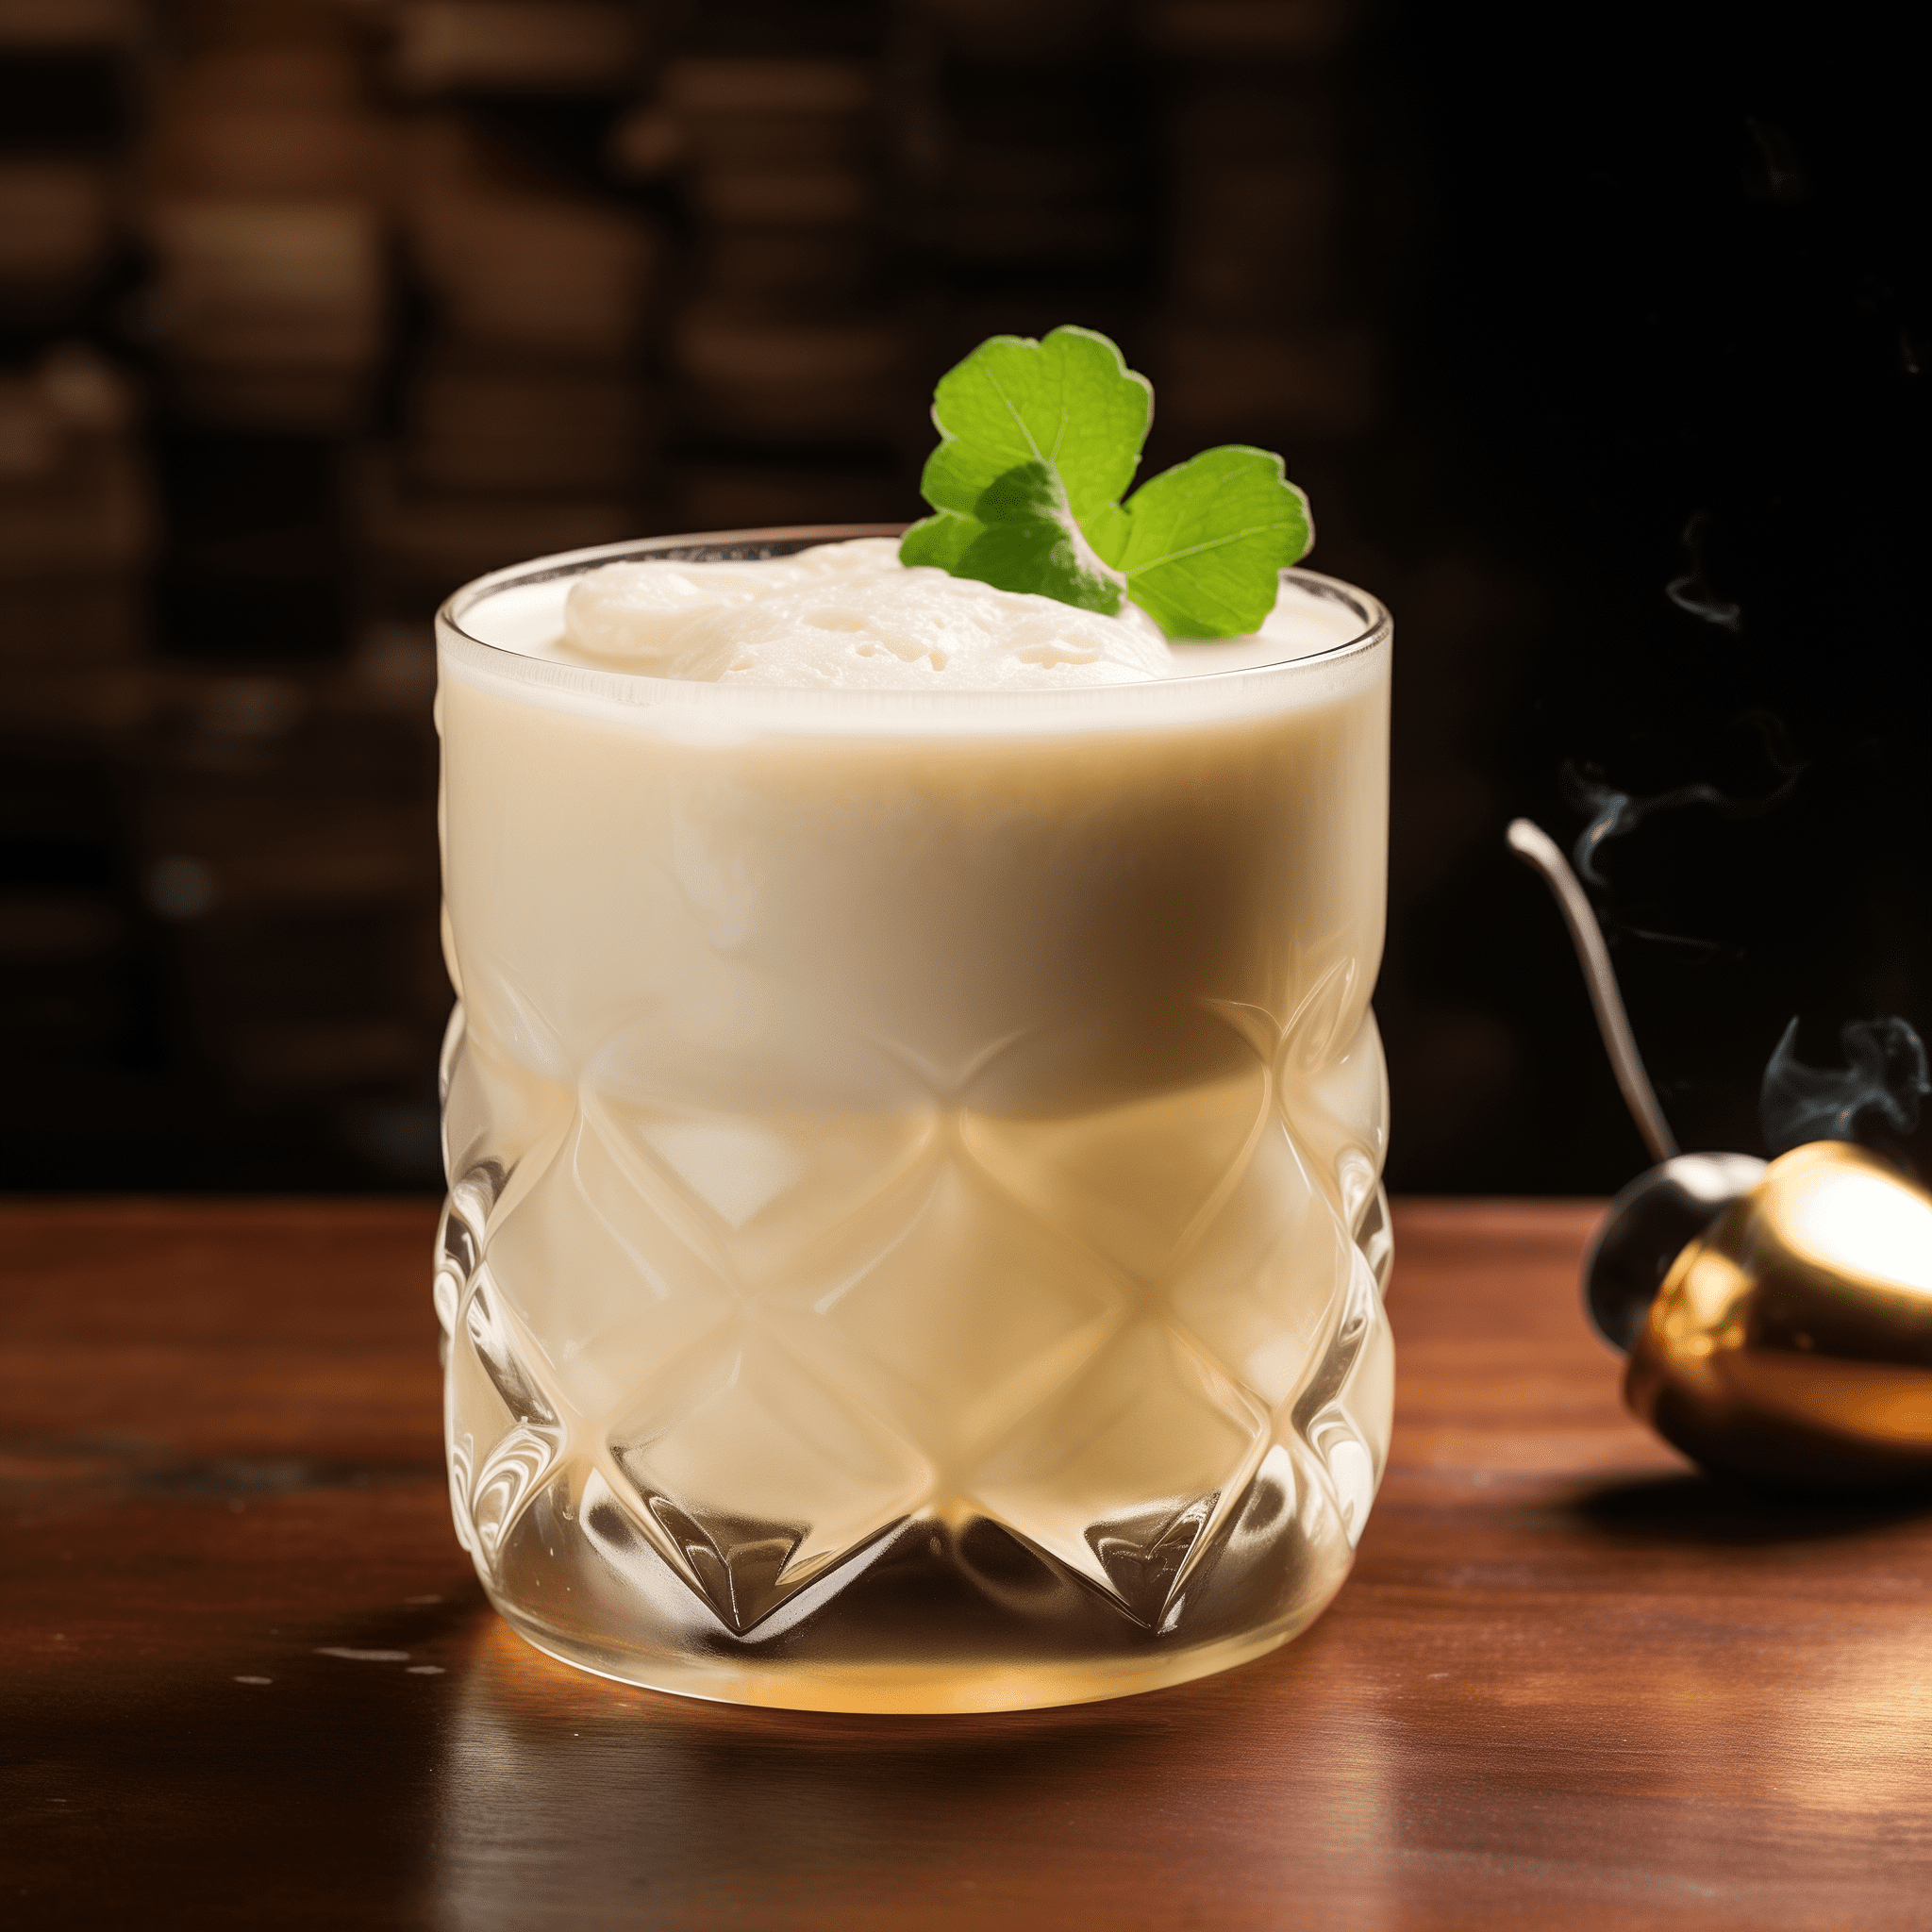 Belfast Bomber Cocktail Recipe - The Belfast Bomber offers a creamy and smooth taste with the rich, velvety texture of Irish cream complemented by the deep, oaky notes of cognac. It's a harmonious blend that's both comforting and invigorating.